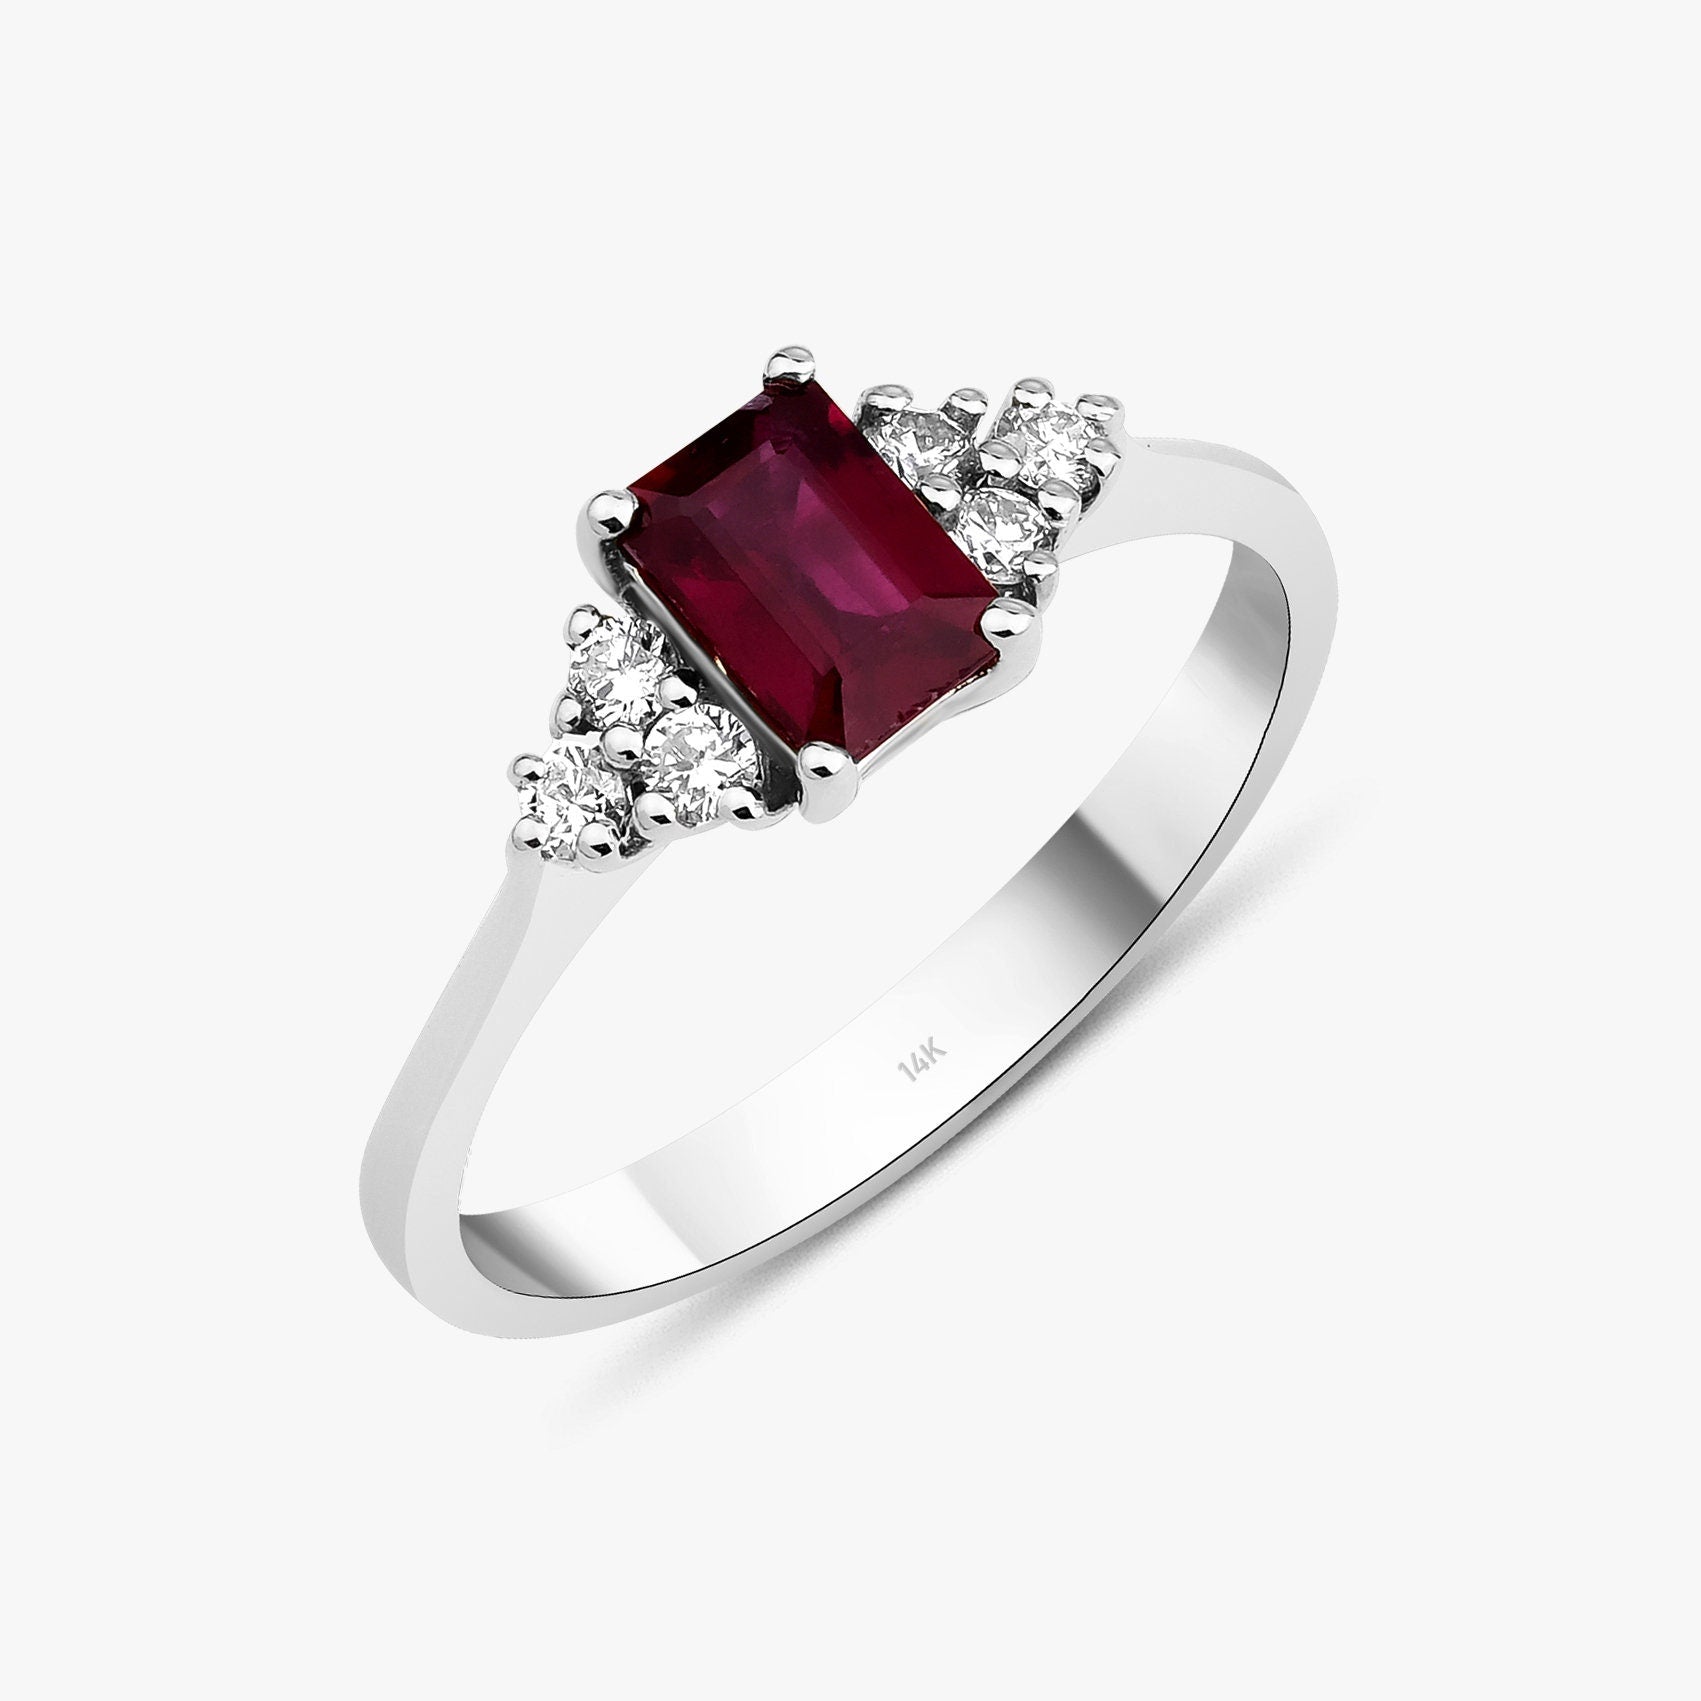 Natural Emerald Cut Ruby and Diamond Ring in 14K Gold